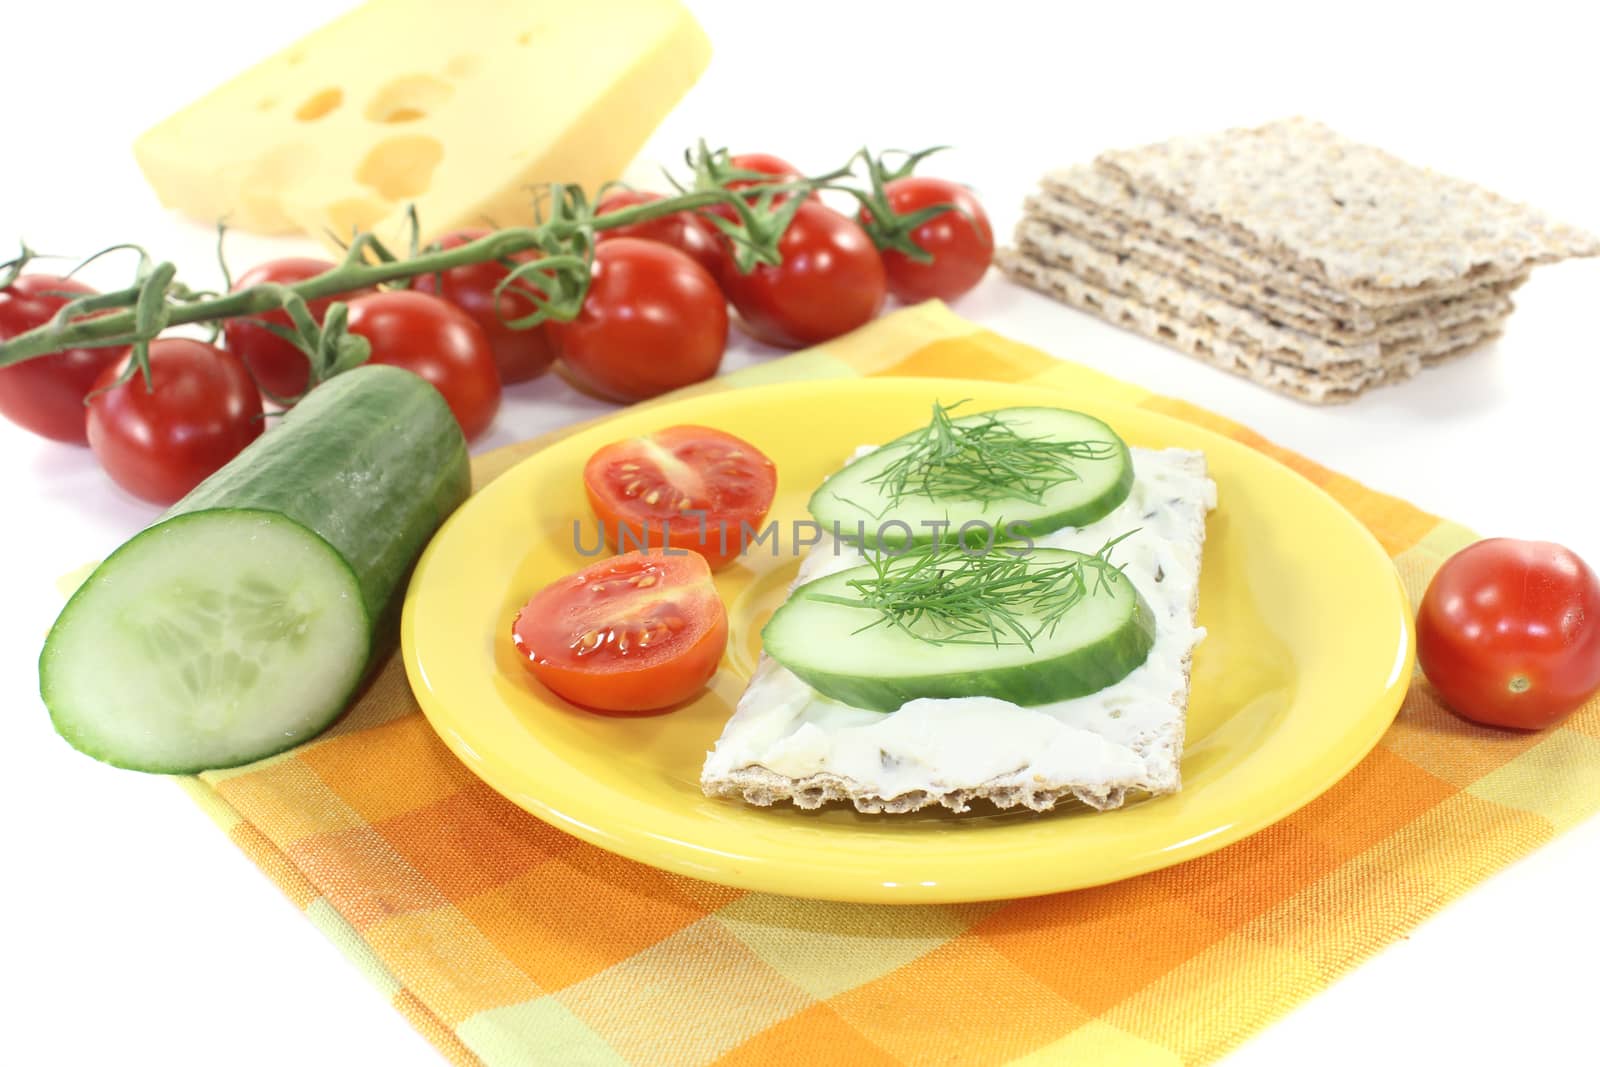 Crispbread with cream cheese on a bright background